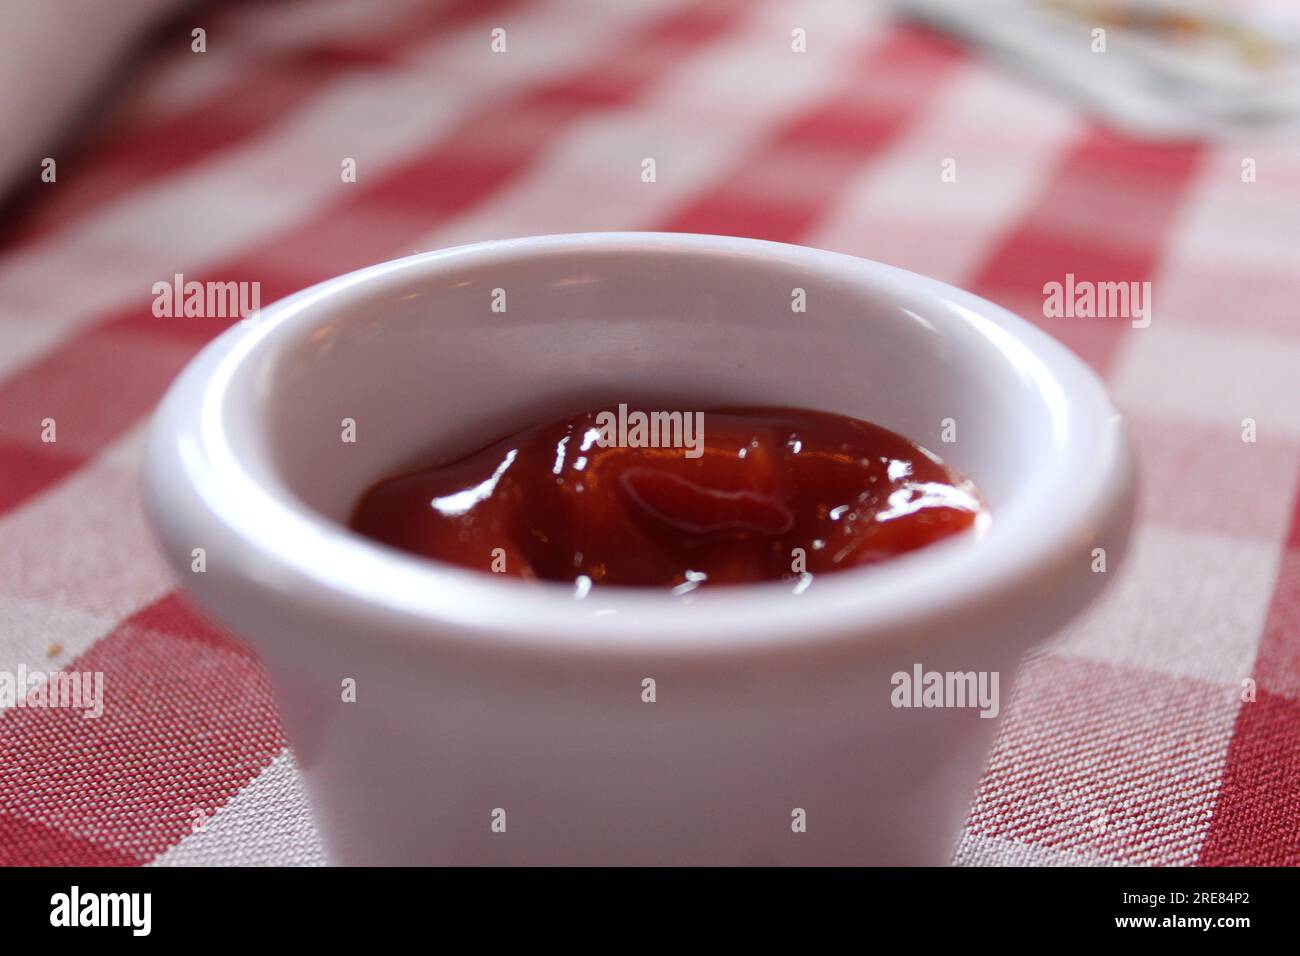 A close up photo of a small pot of tomato ketchup on a red and white checkered table. Stock Photo